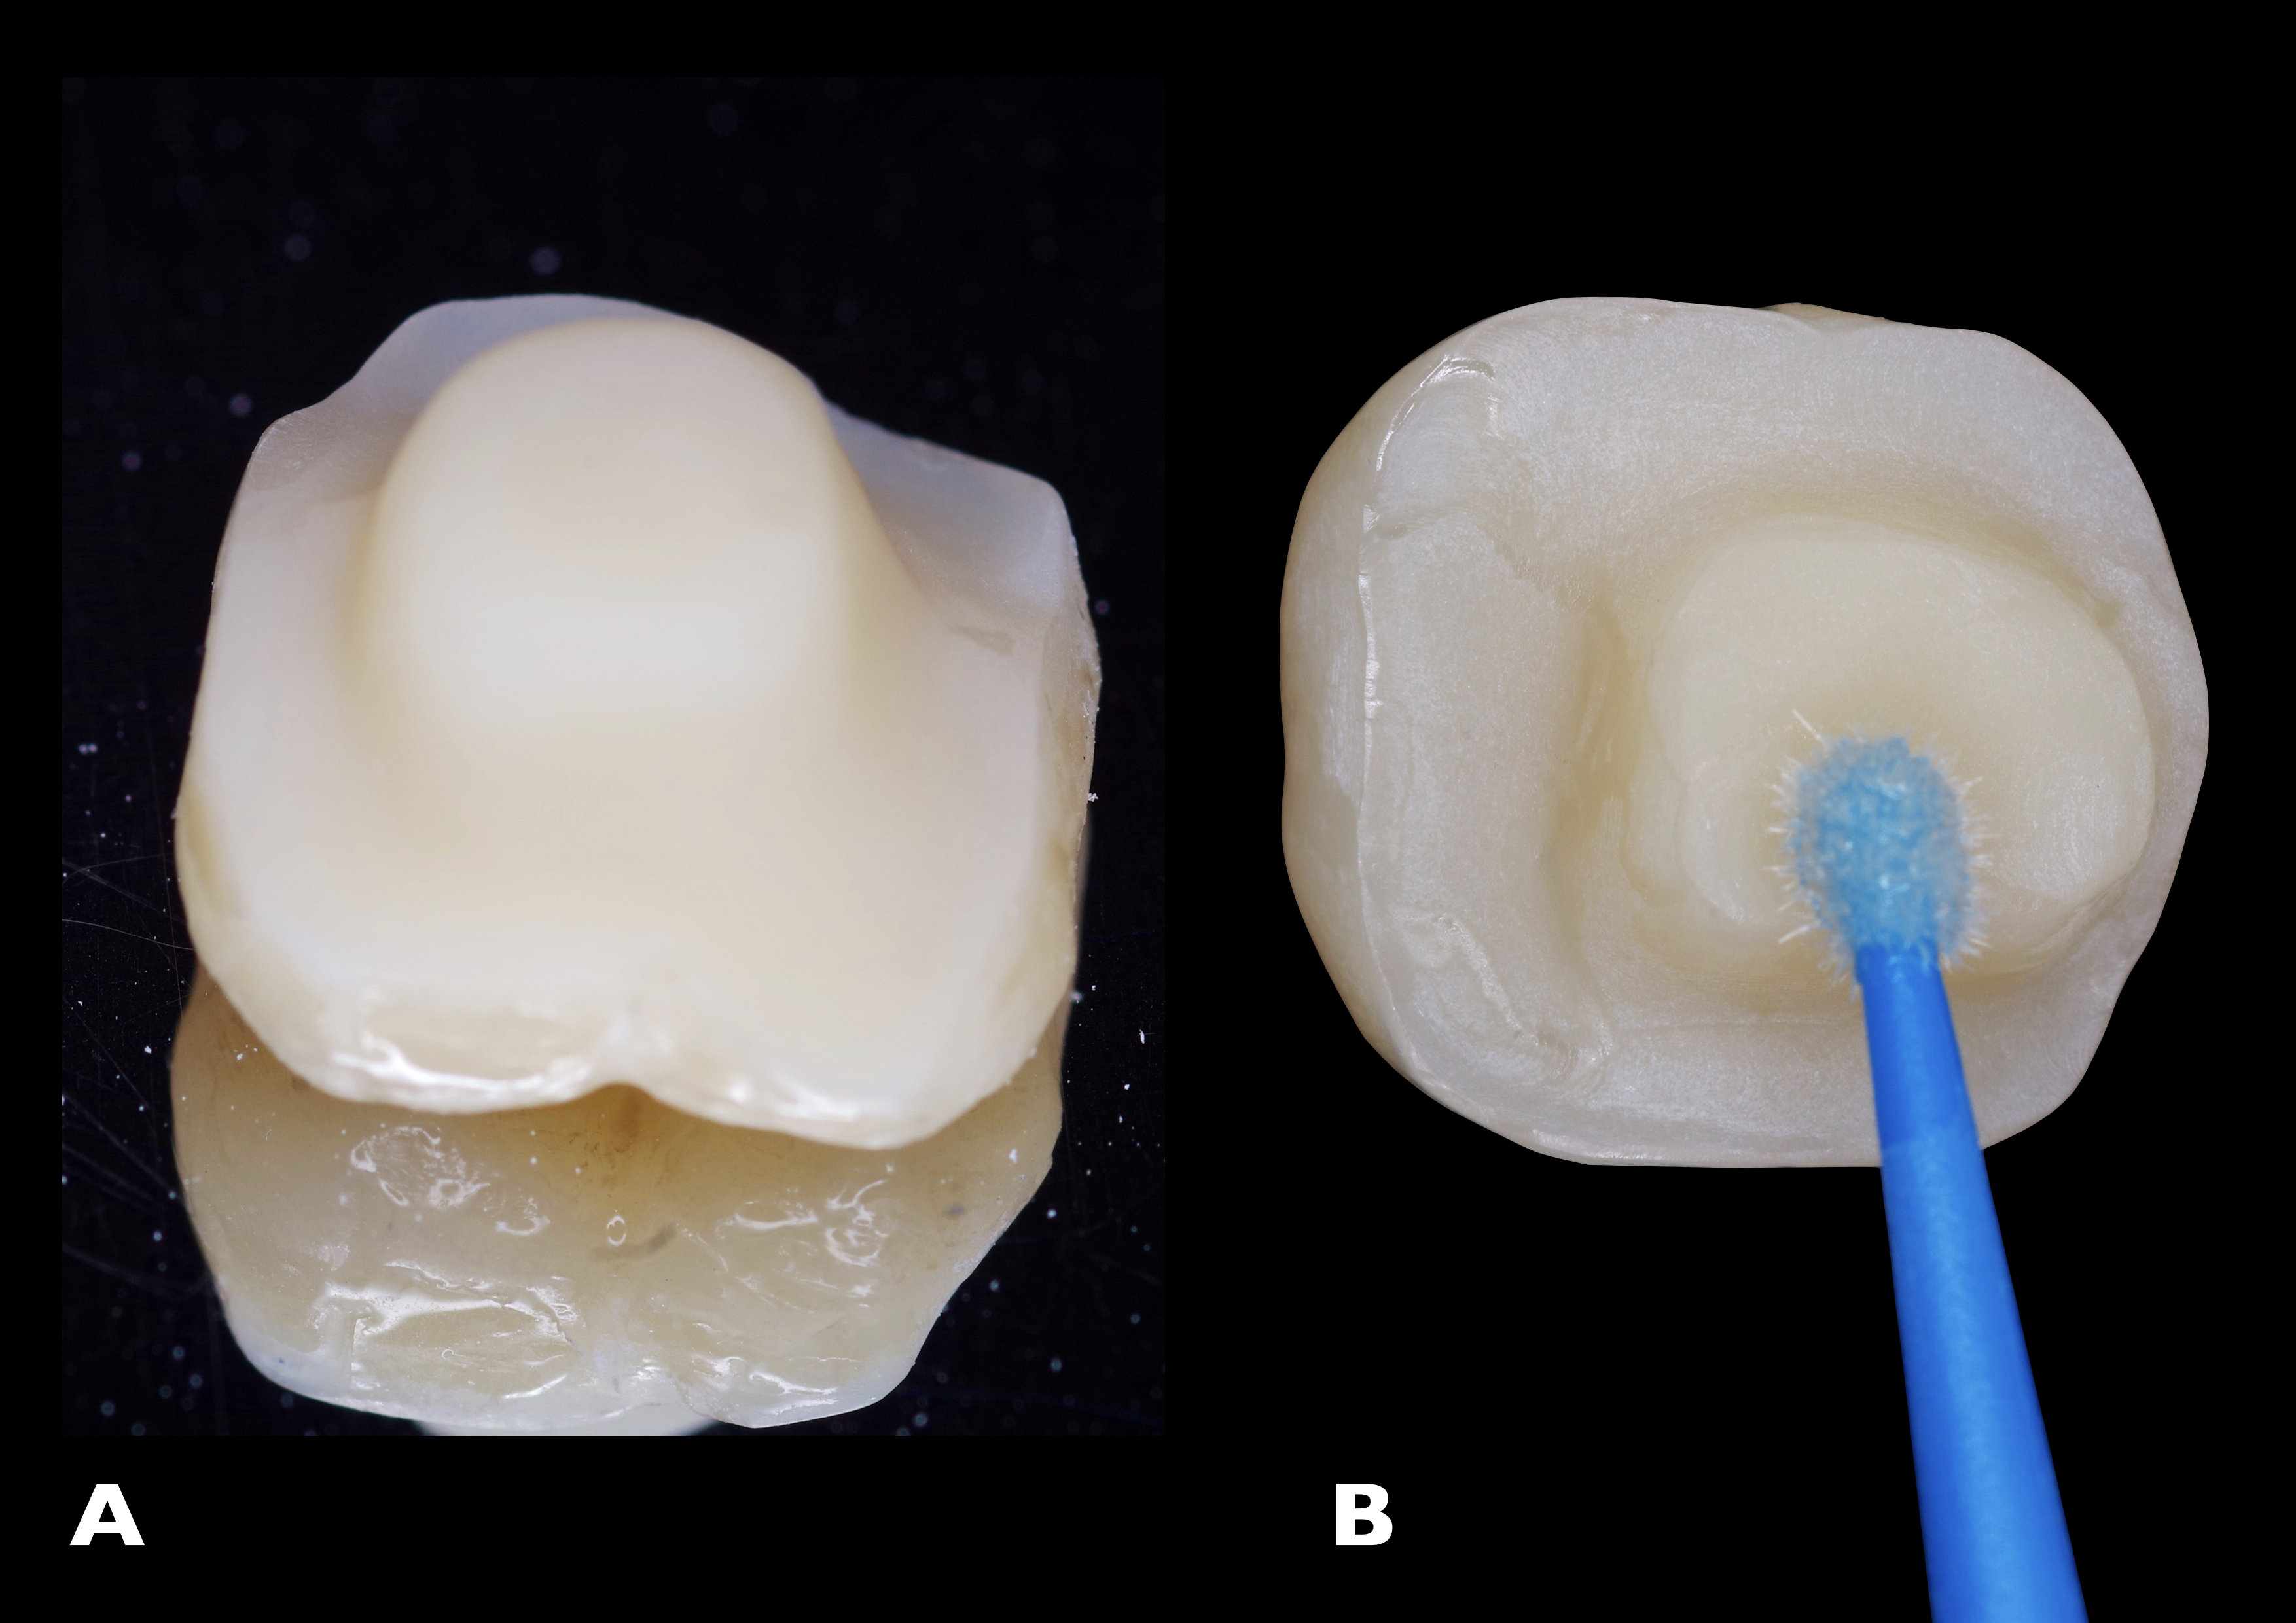 Figs. 18a & b: Inner surface of the endocrown after sandblasting with aluminium oxide particles, followed by cleaning of the surface with distilled water and detergent (a). Application of Ceramic Bond (b).